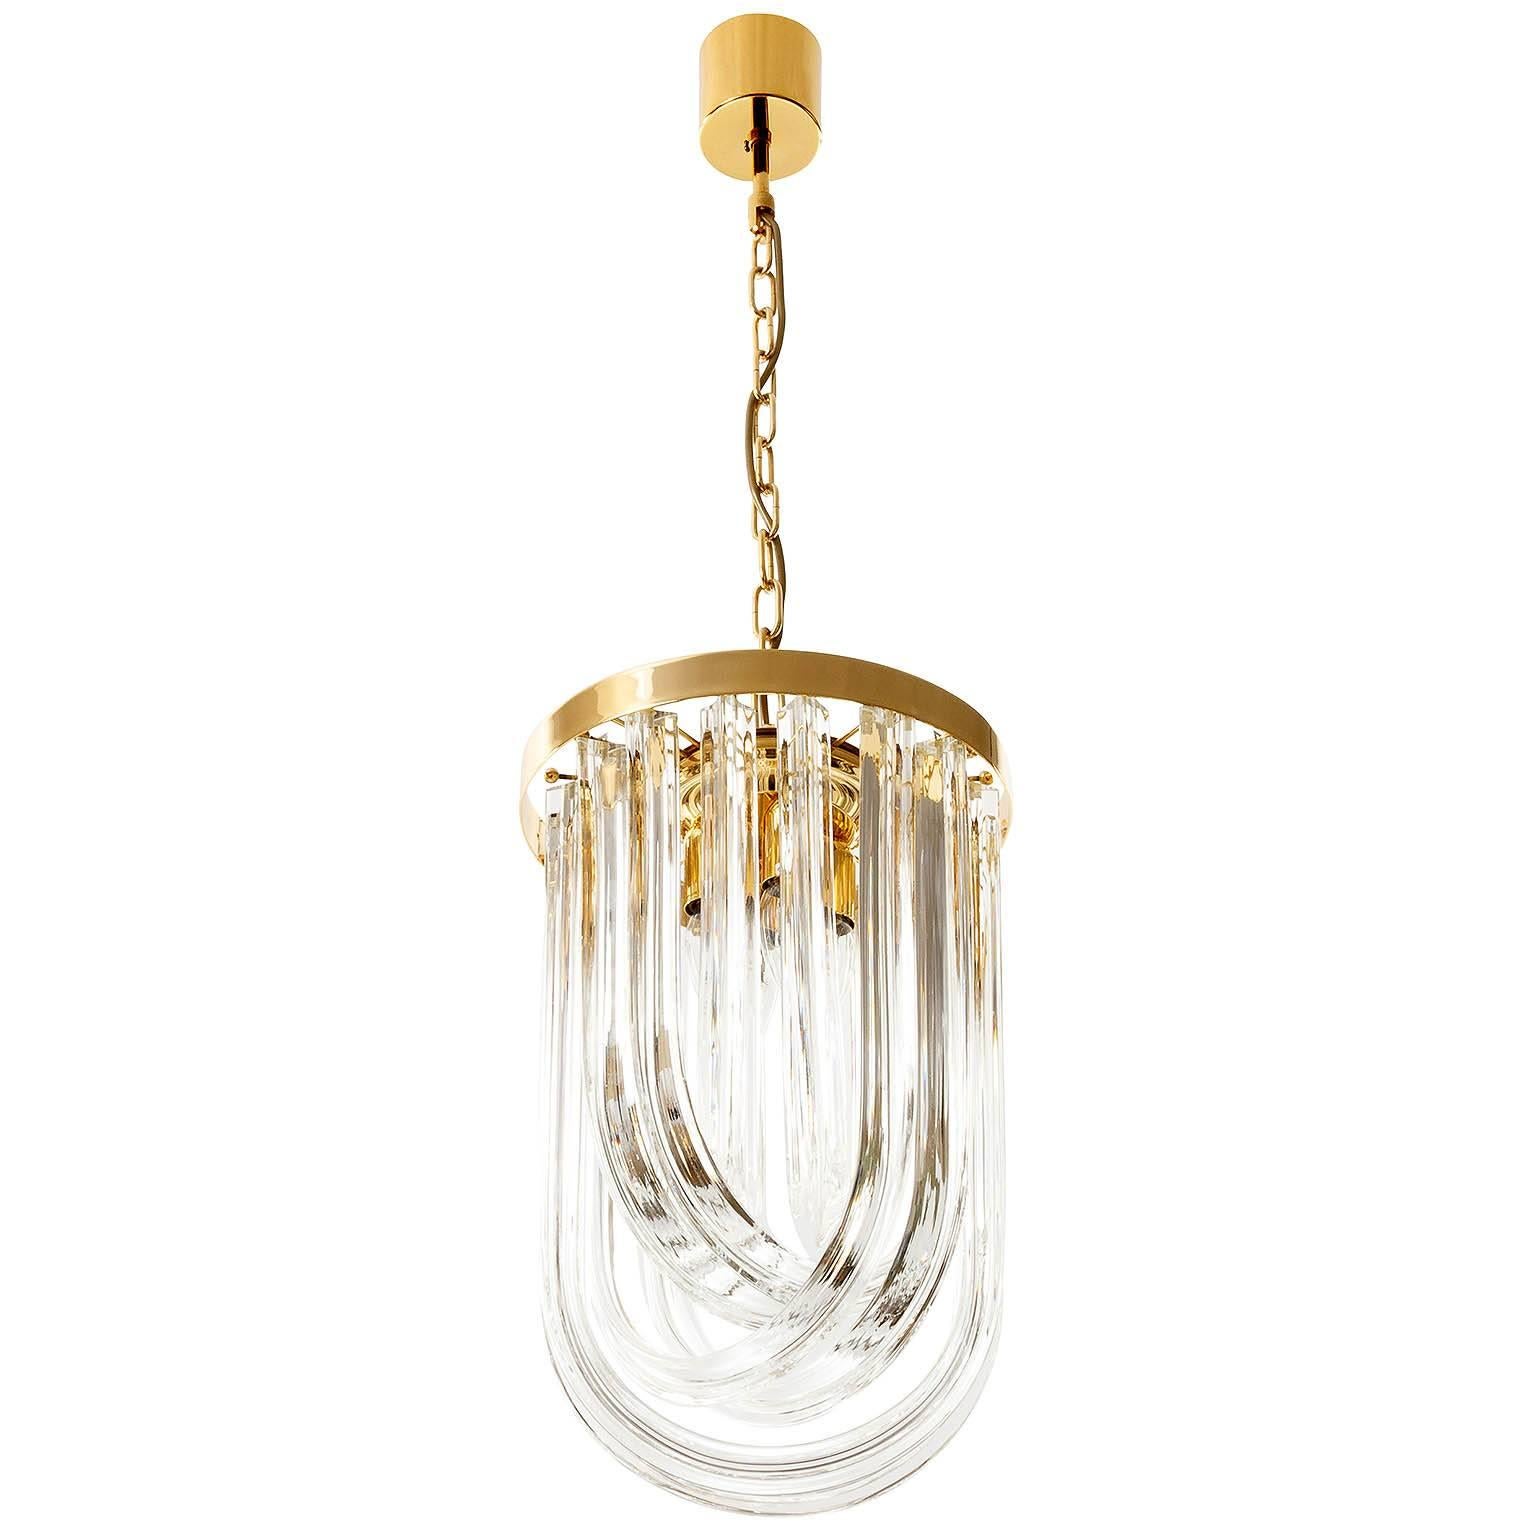 A wonderful Italian hollywood regency pendant light by Venini manufactured in Mid-Century in the 1960s. It is made of pairwise curved crystal Murano glasses in different lengths and a gold-plated brass frame. Excellent condition.
The height of the